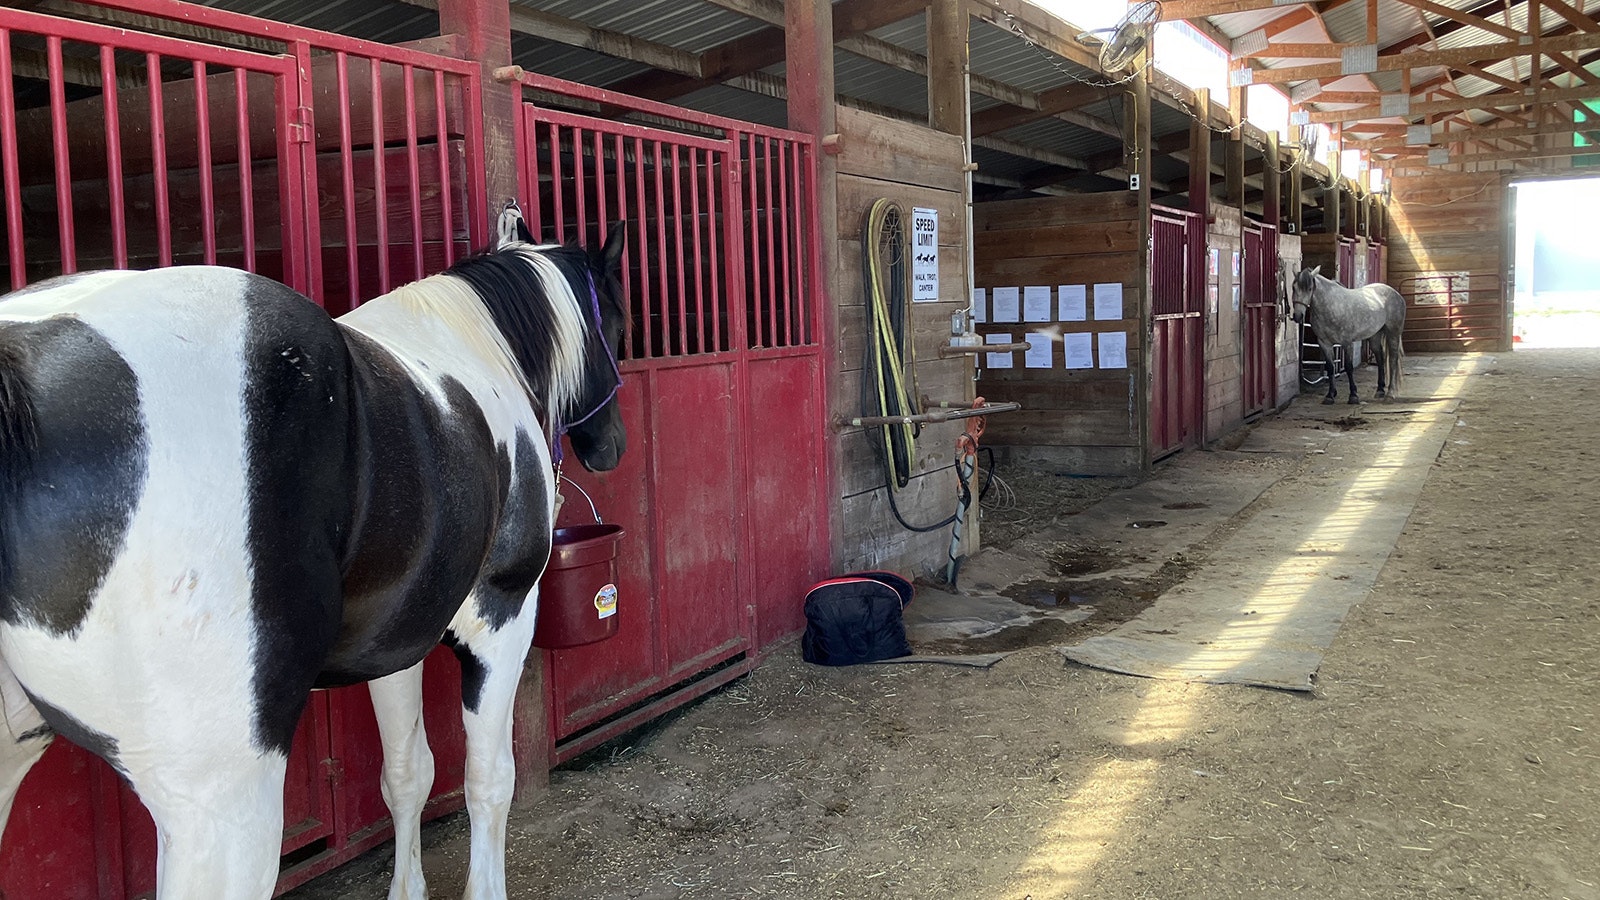 Inside the horse barn are several stalls for horses as well as rooms for tack and equipment.